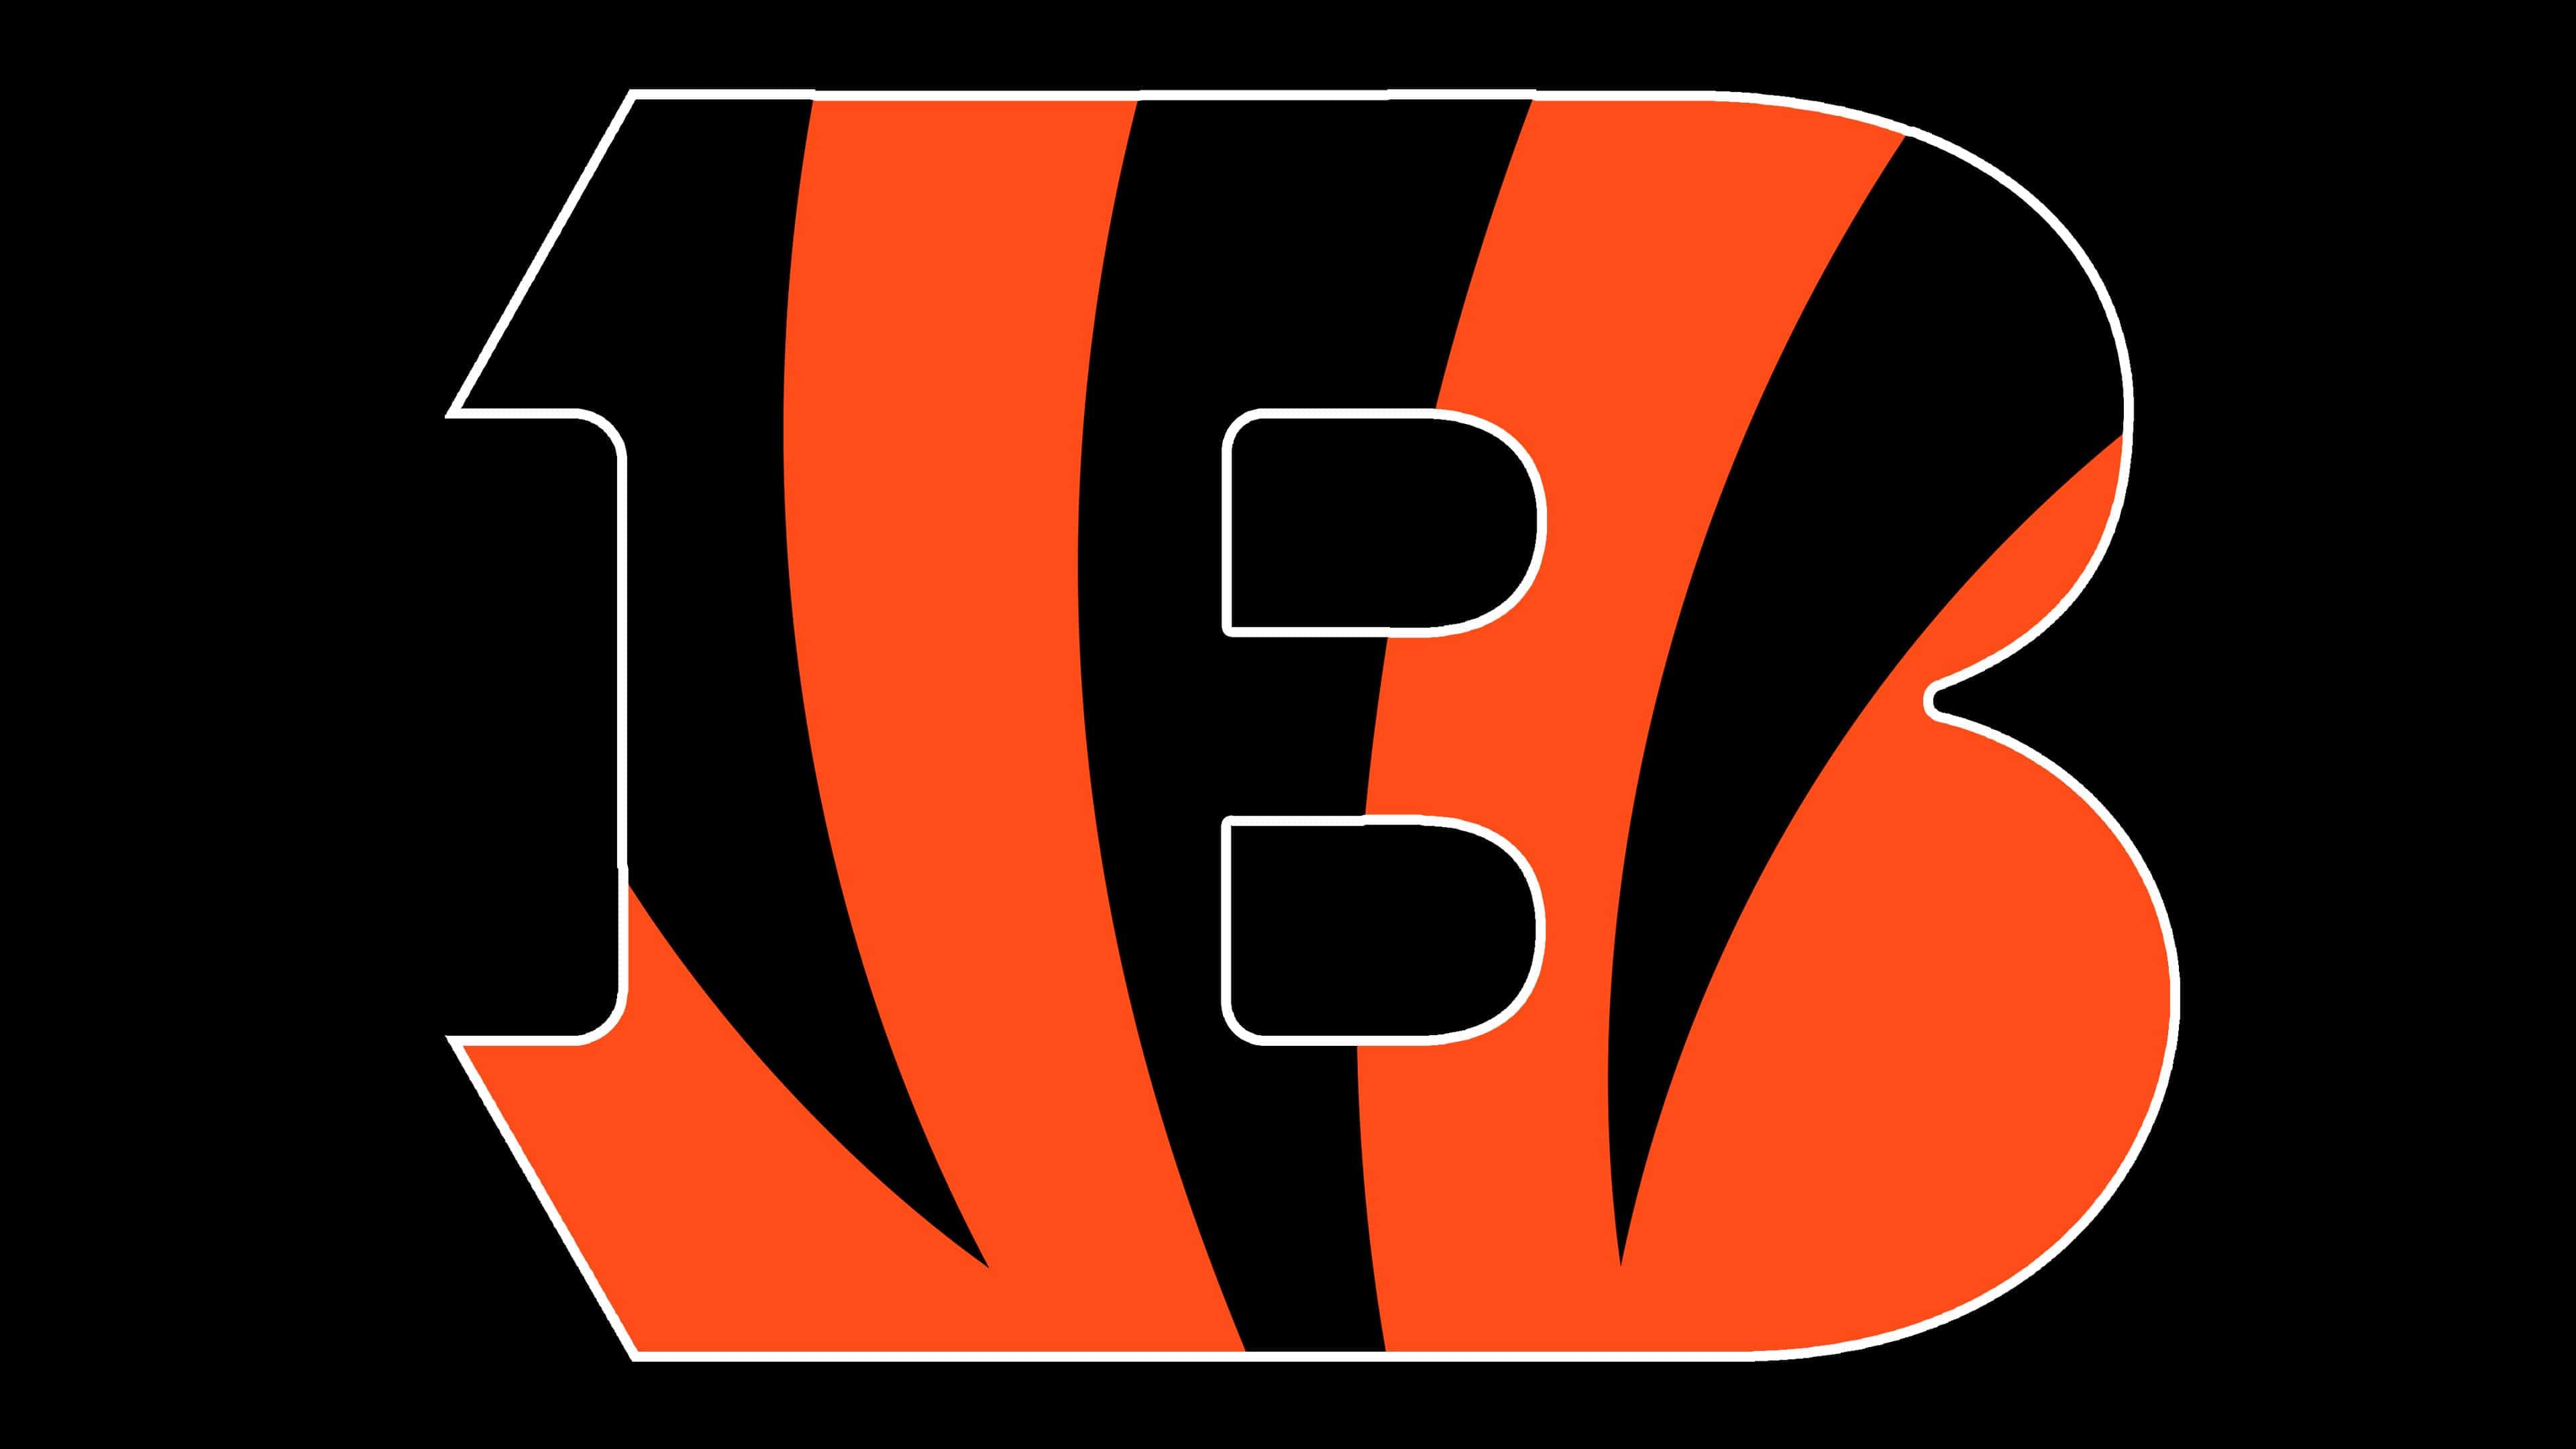 The letter "B" that begins the word "Bengals" reflects ...